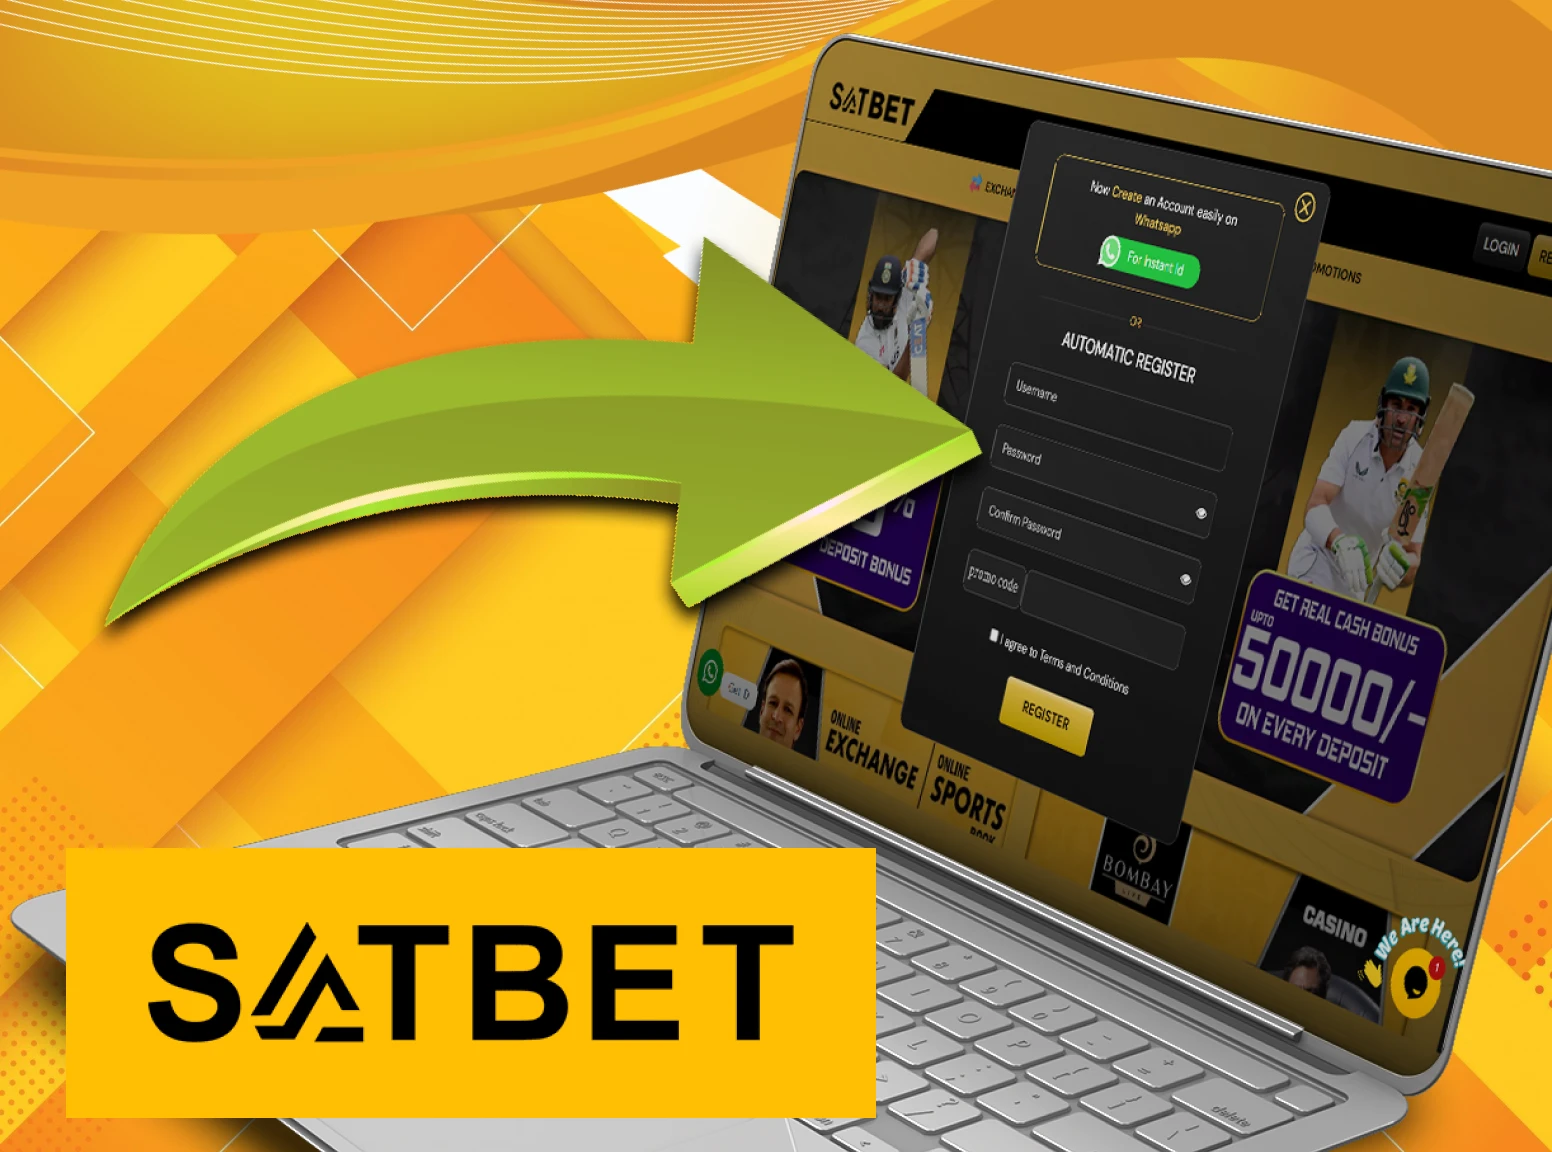 To receive a bonus from a promotional code, fill out all the data on Satbet.